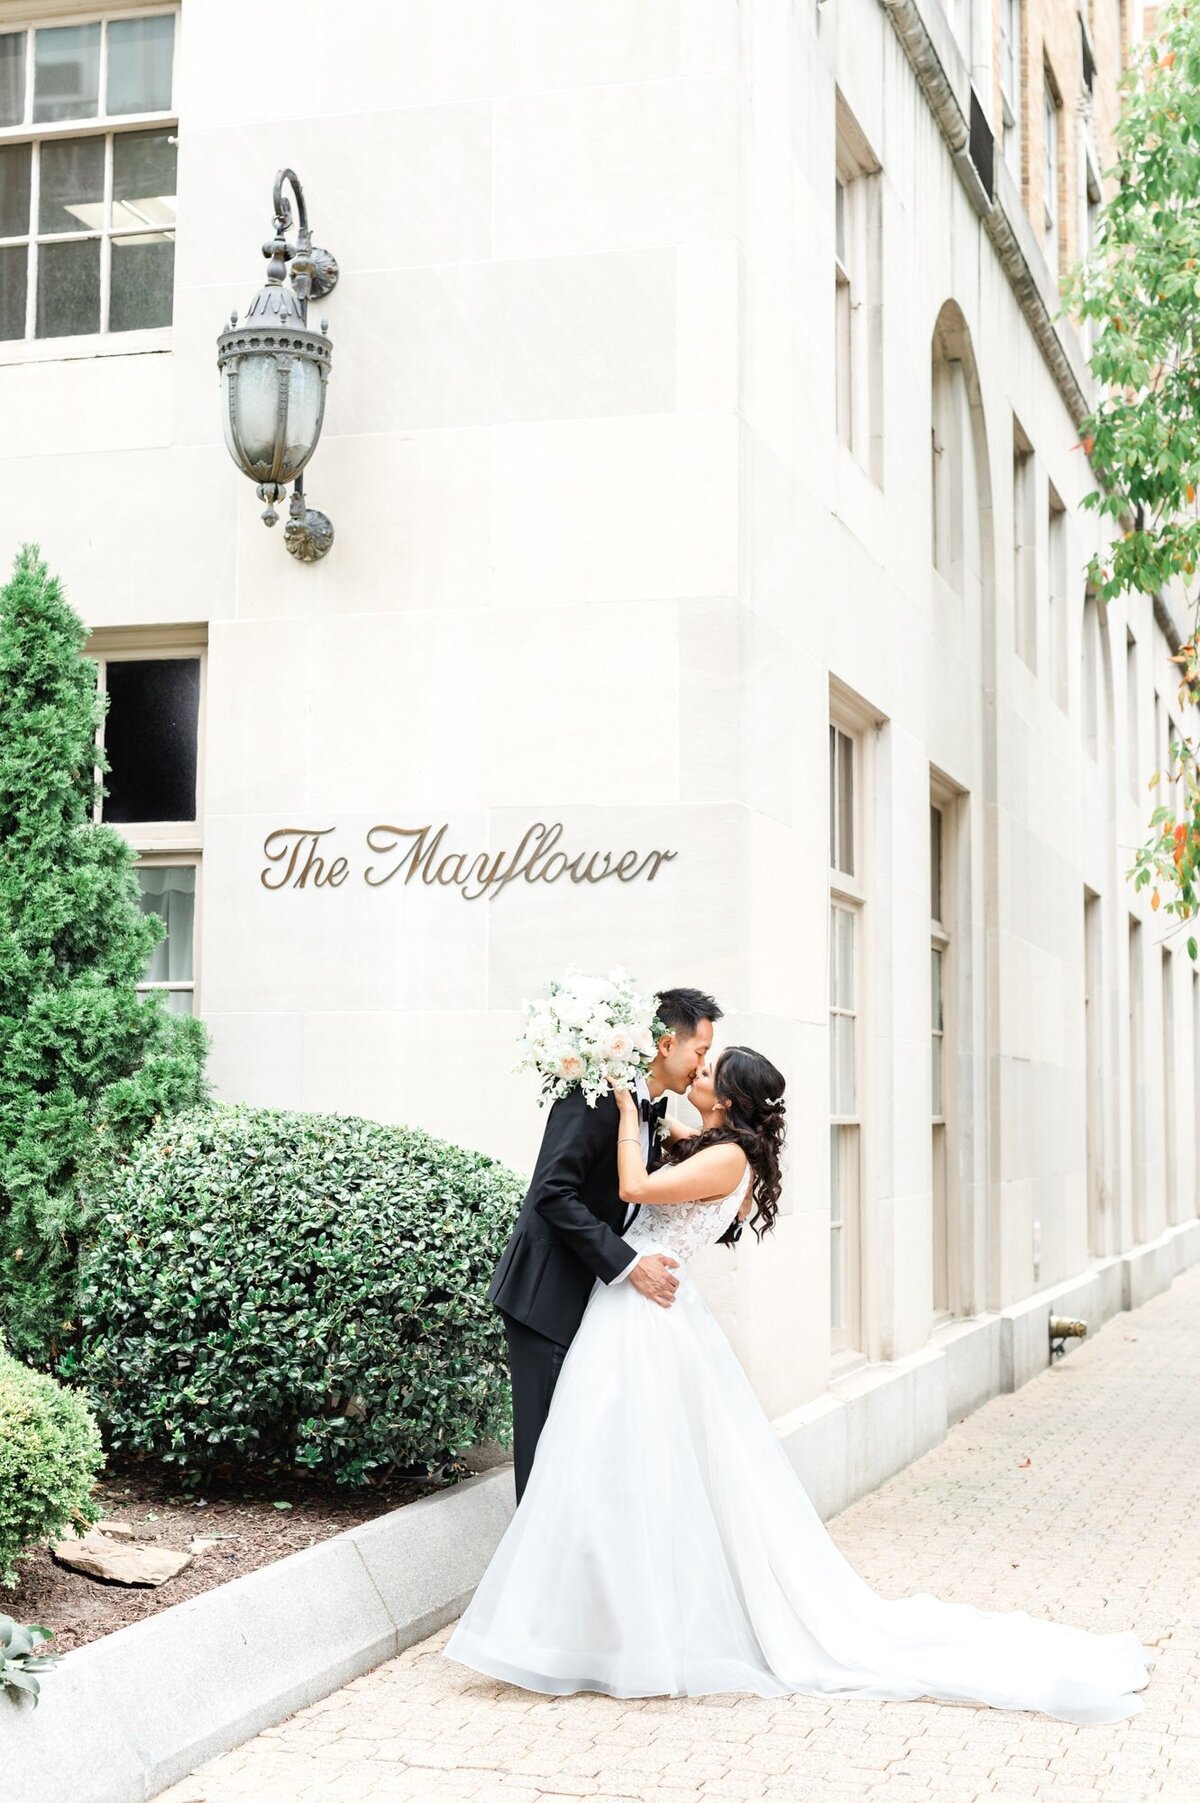 Groom kissing Bride outside of the Mayflower Hotel in Washington DC showing hotel sign